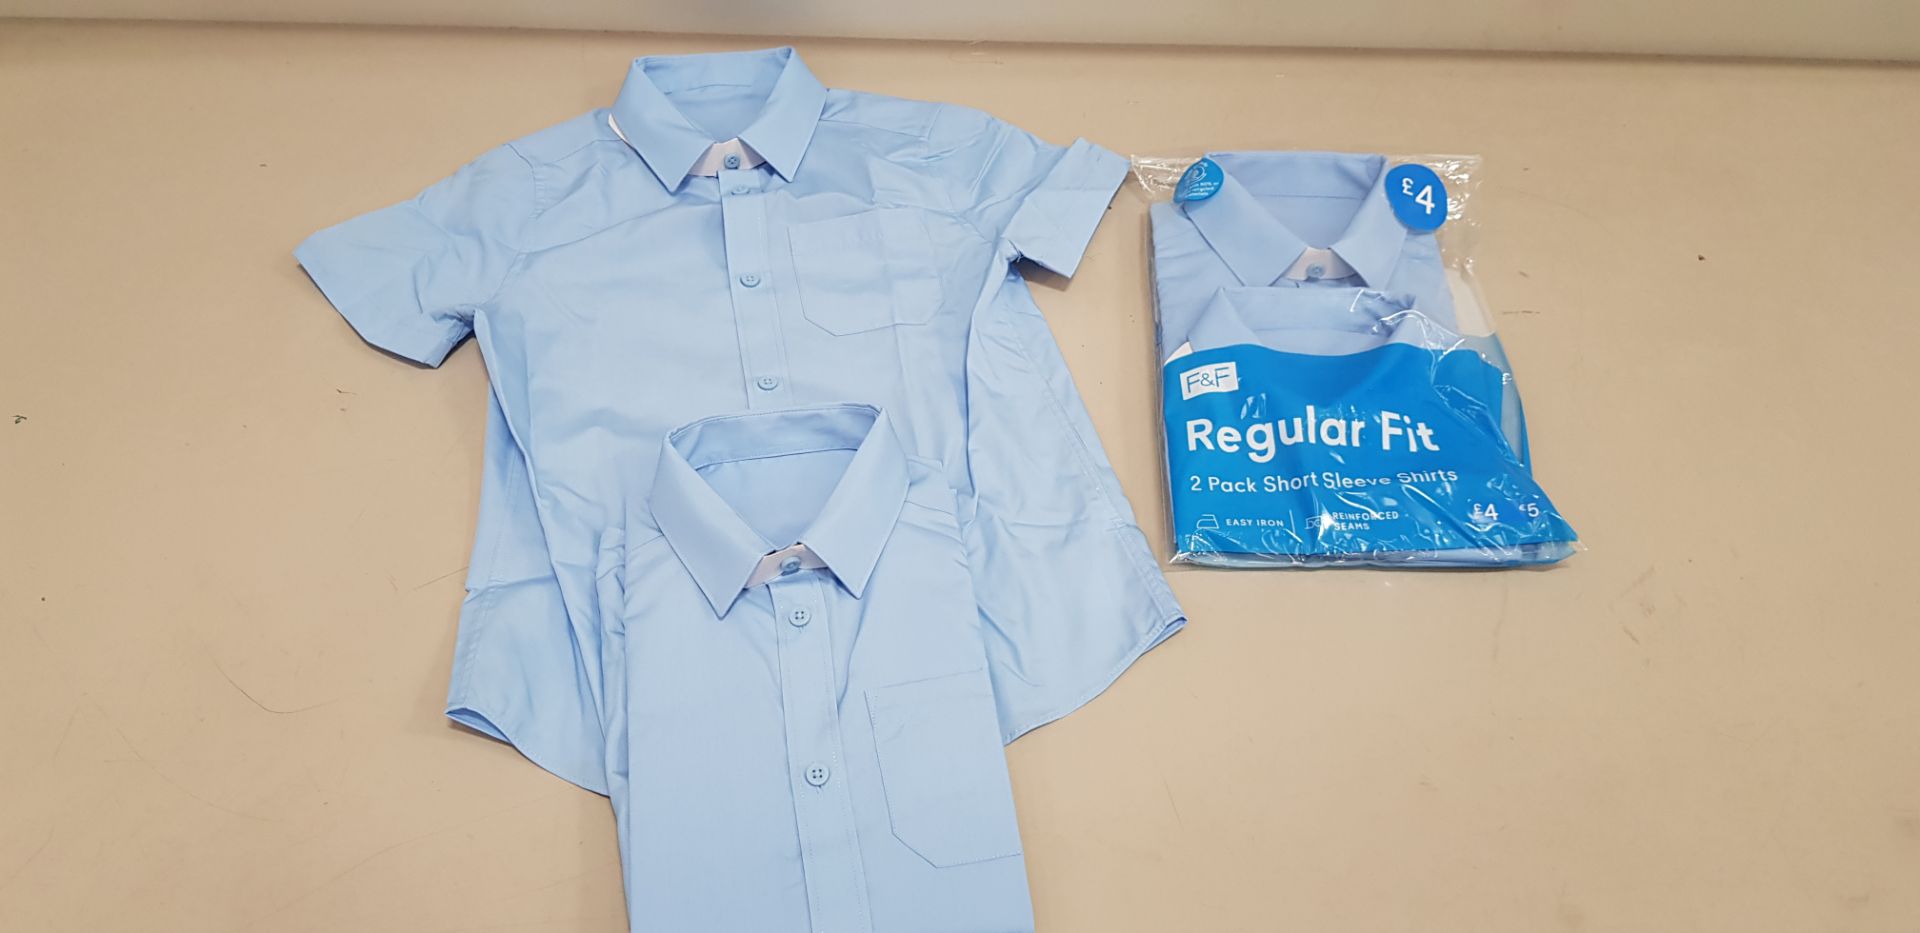 80 X BRAND NEW F&F PACKS OF 2 BOYS REGULAR FIT BLUE SHIRTS IN LONG AND SHORT SLEEVE ALL IN VARIOUS